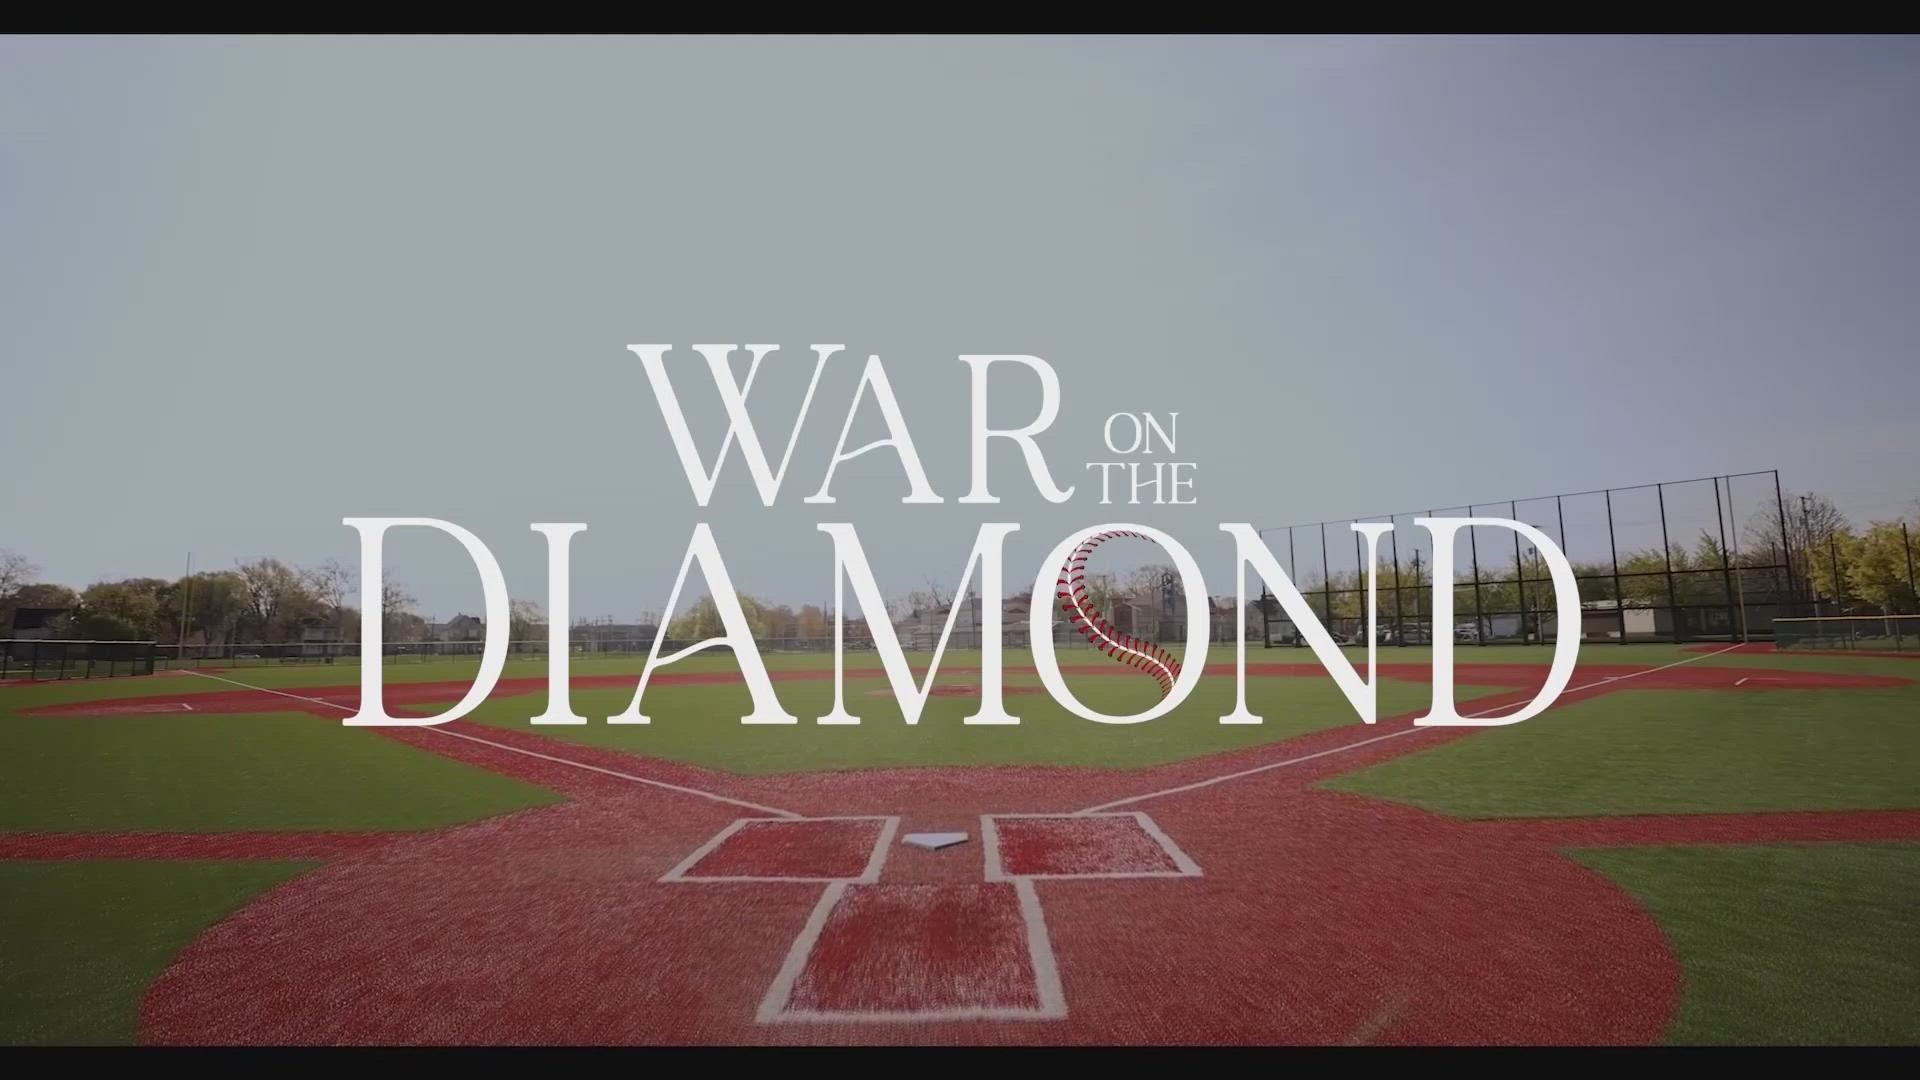 'War on the Diamond' documents the heated rivalry that was ignited by one pitch in 1920.